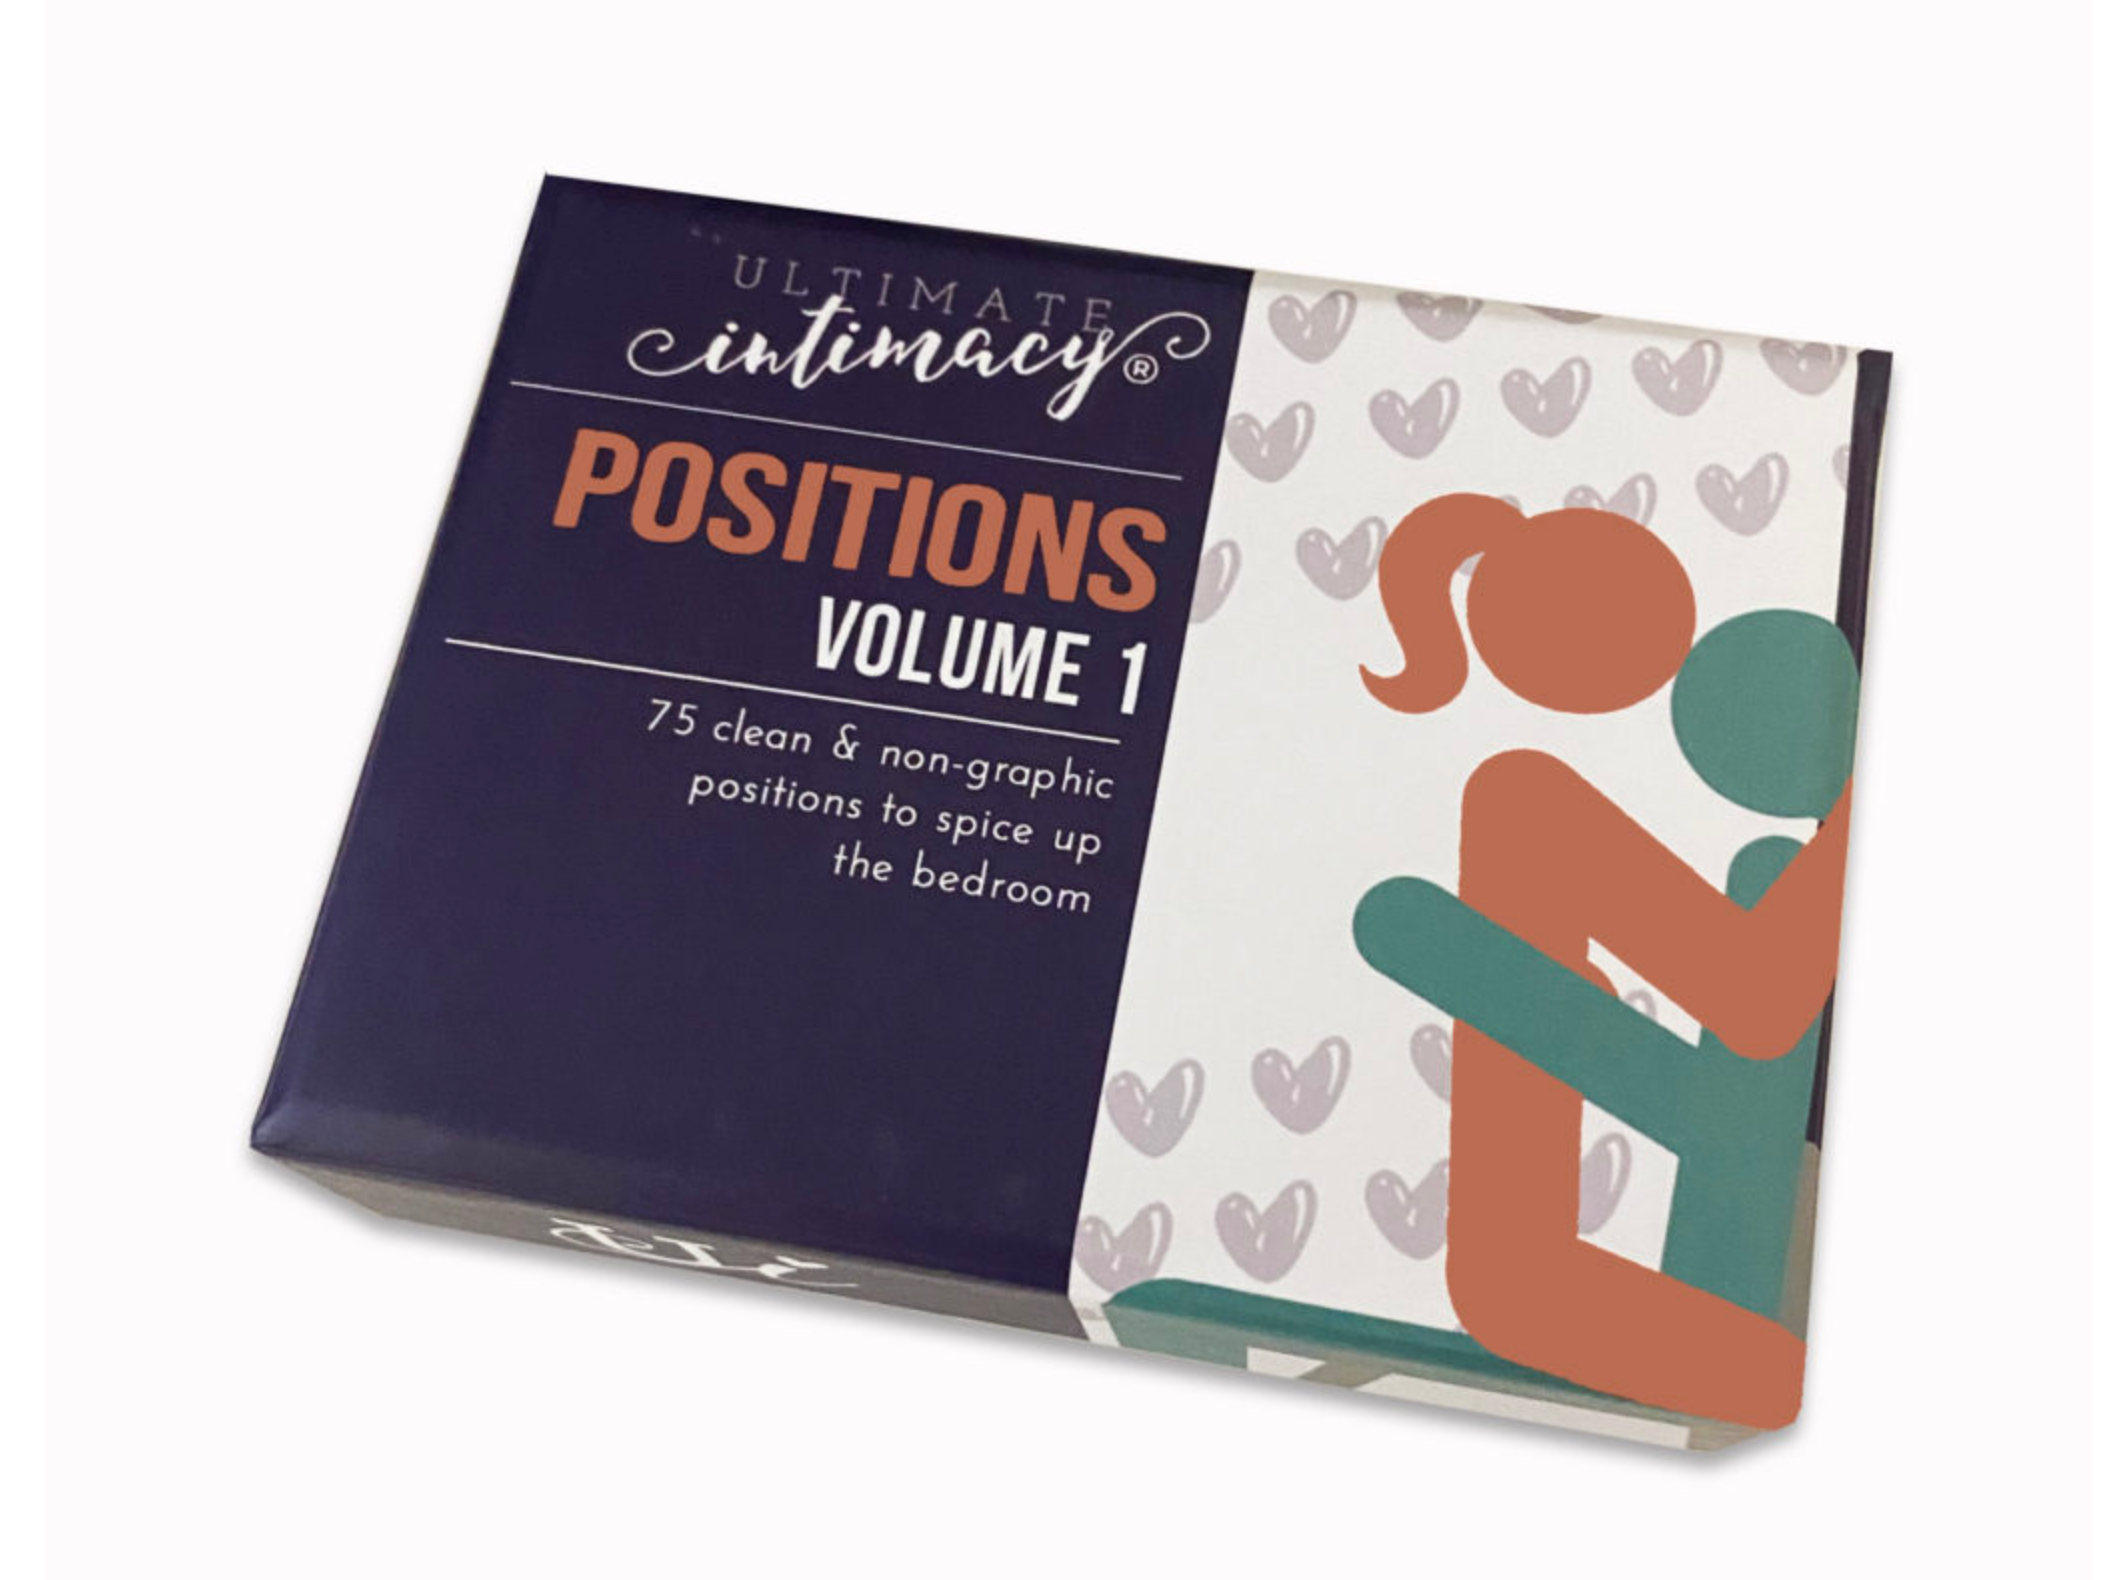 The new SEX position card deck to improve your sexual intimacy!